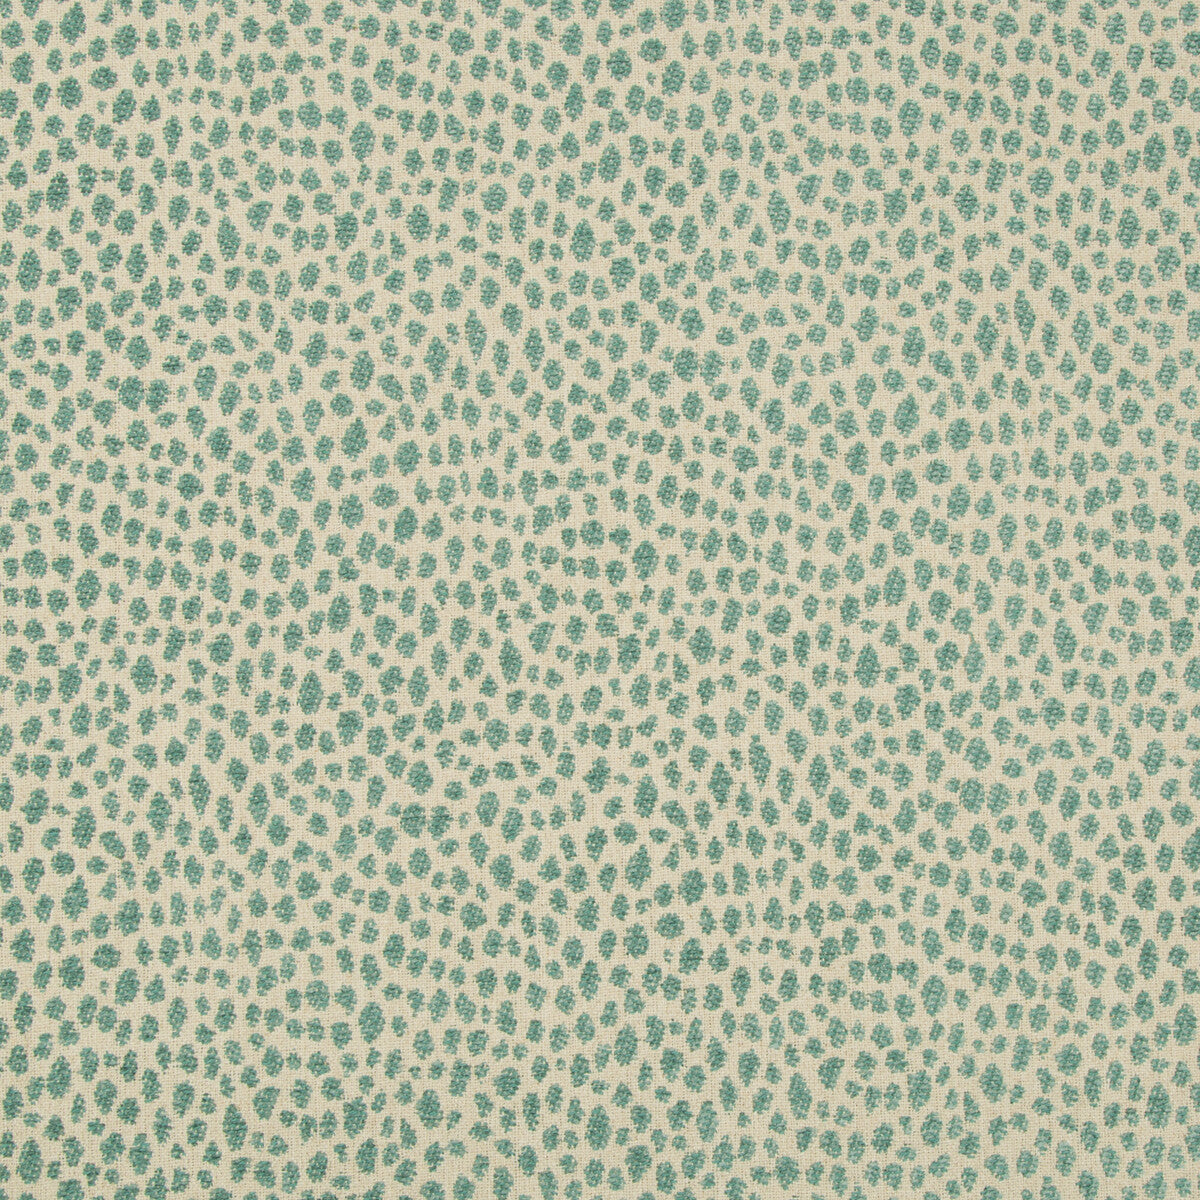 Mago fabric in lagoon color - pattern 2017147.13.0 - by Lee Jofa in the Merkato collection